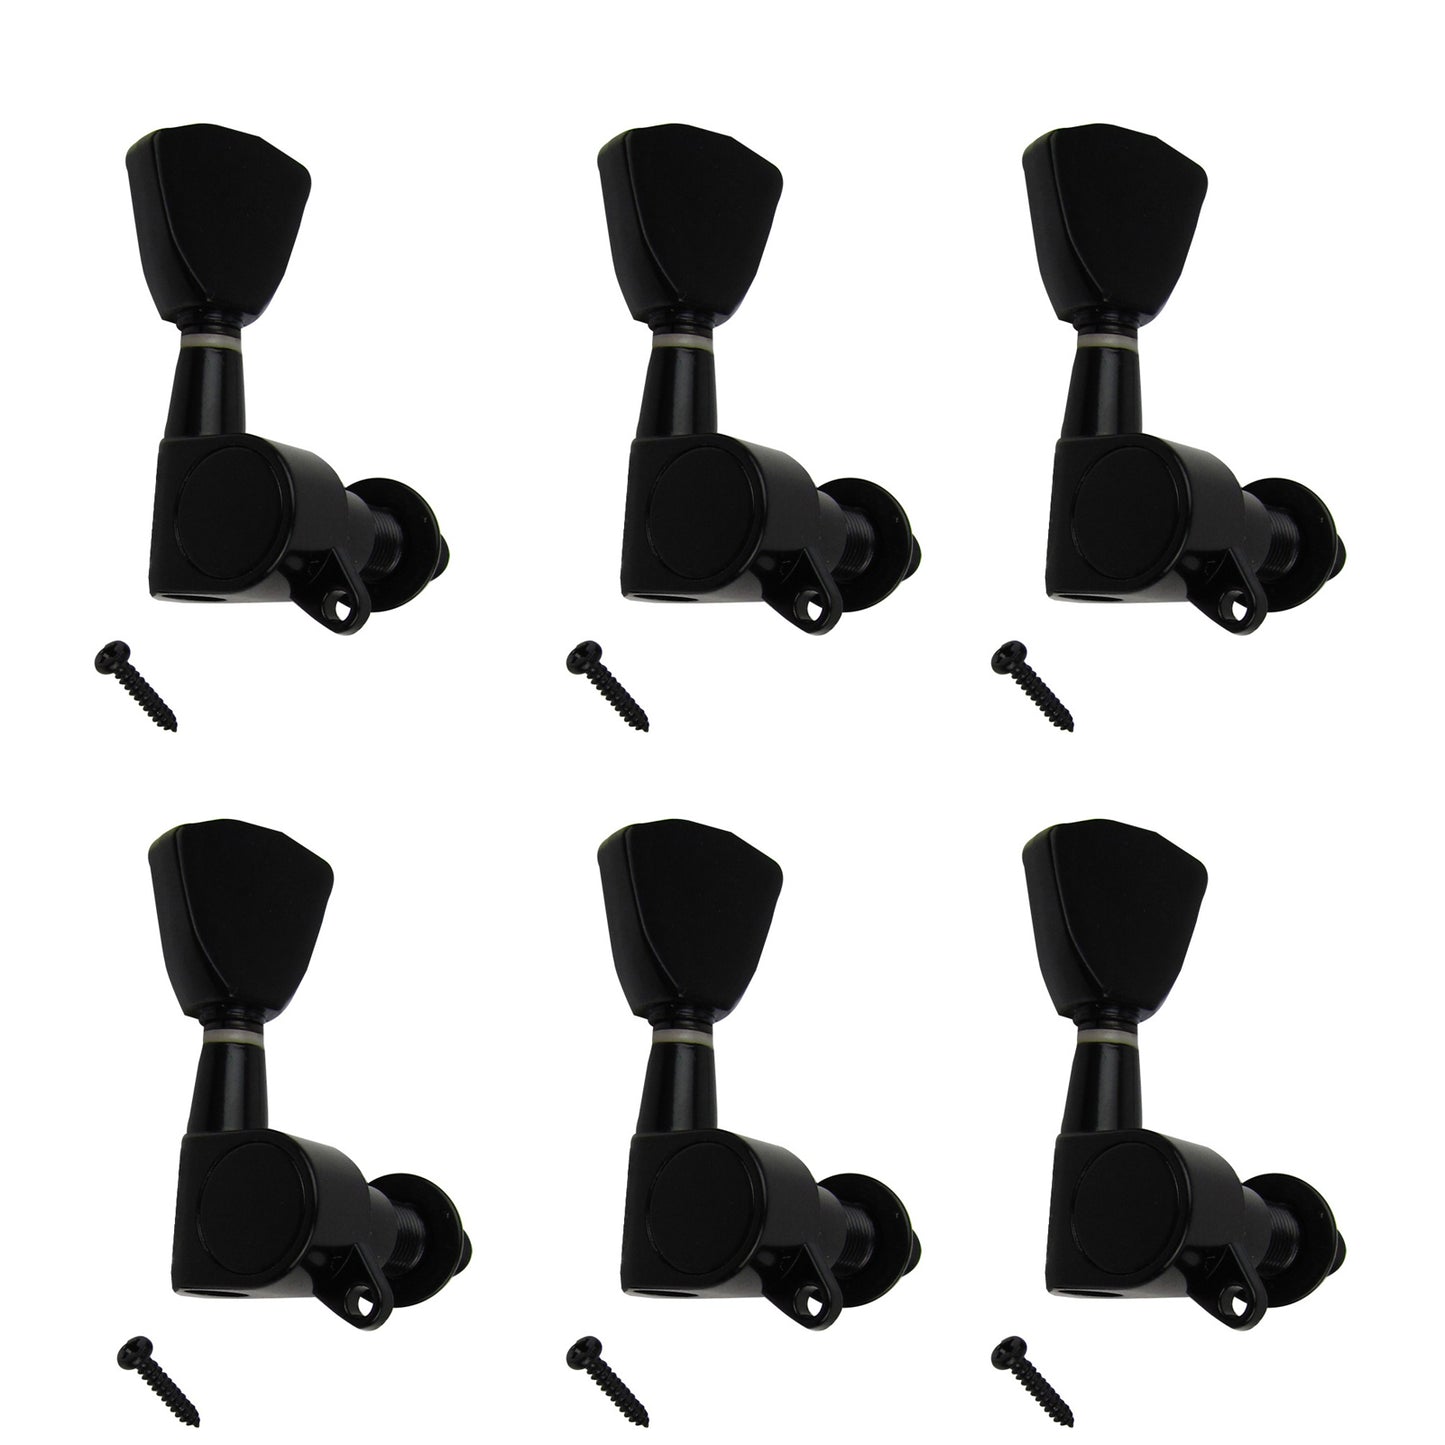 Musiclily 6-in-line Guitar Sealed Tuners Tuning Pegs Keys Machine Heads Set, Tulip Button Black